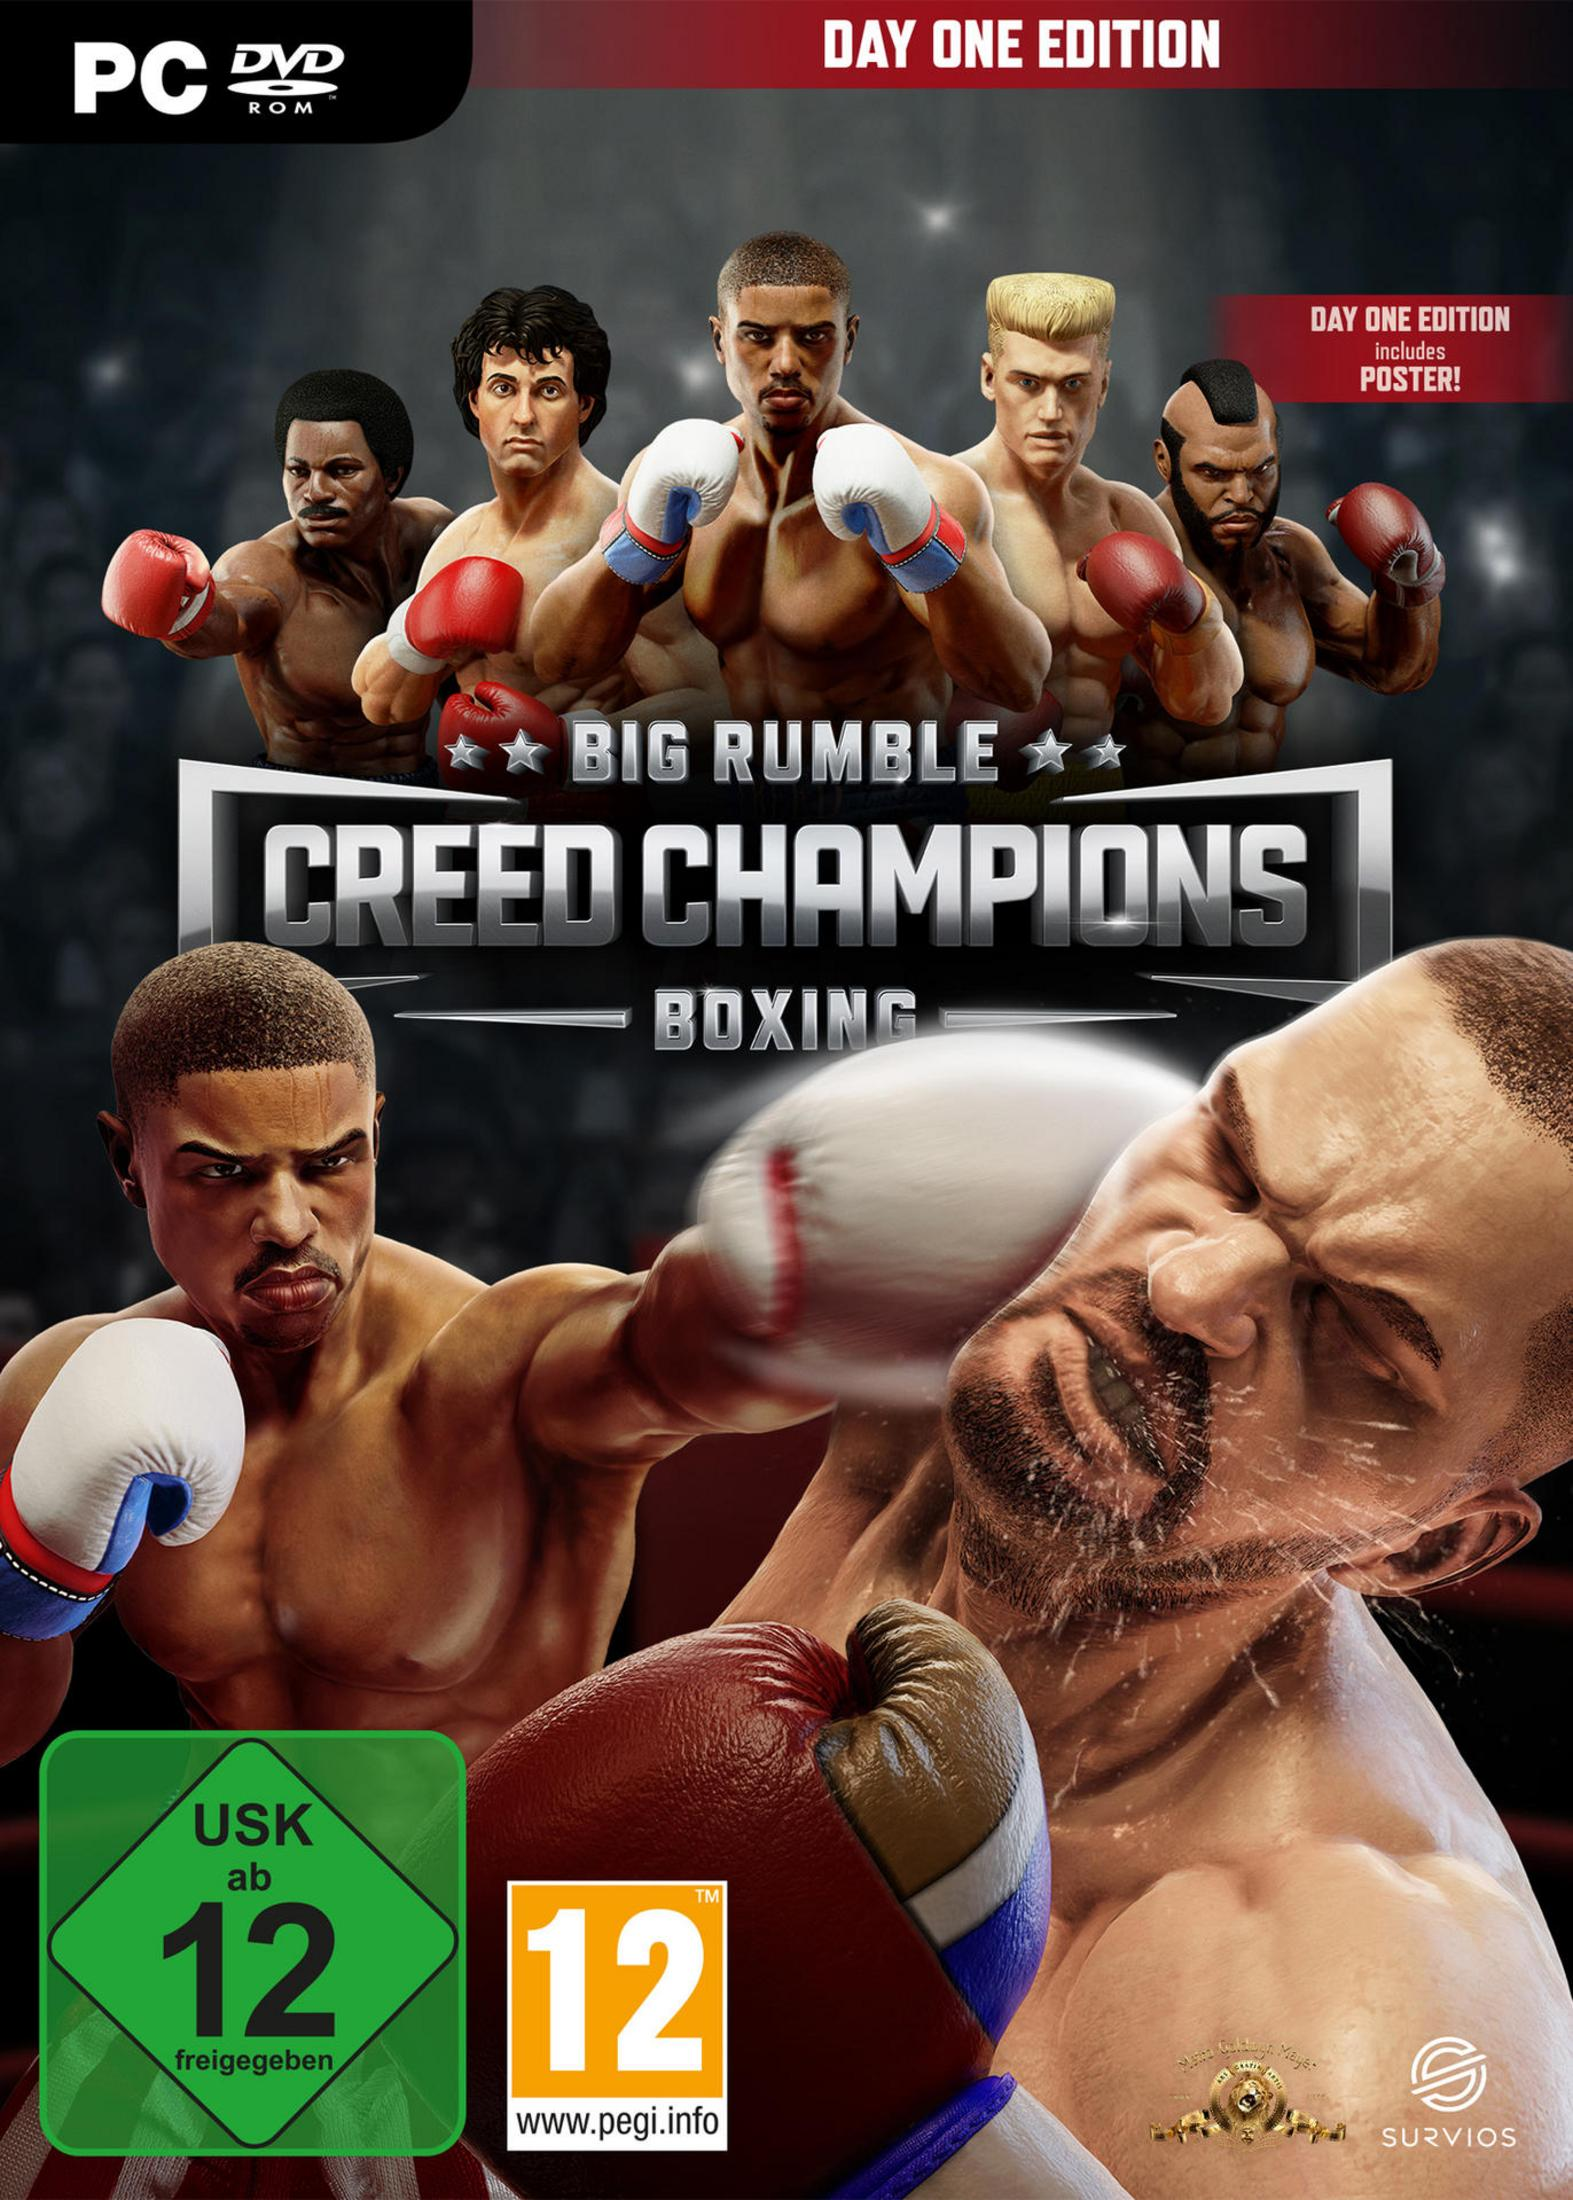 RUMBLE ED. BOXING-CREED ONE CHAMPIONSDAY - BIG [PC]